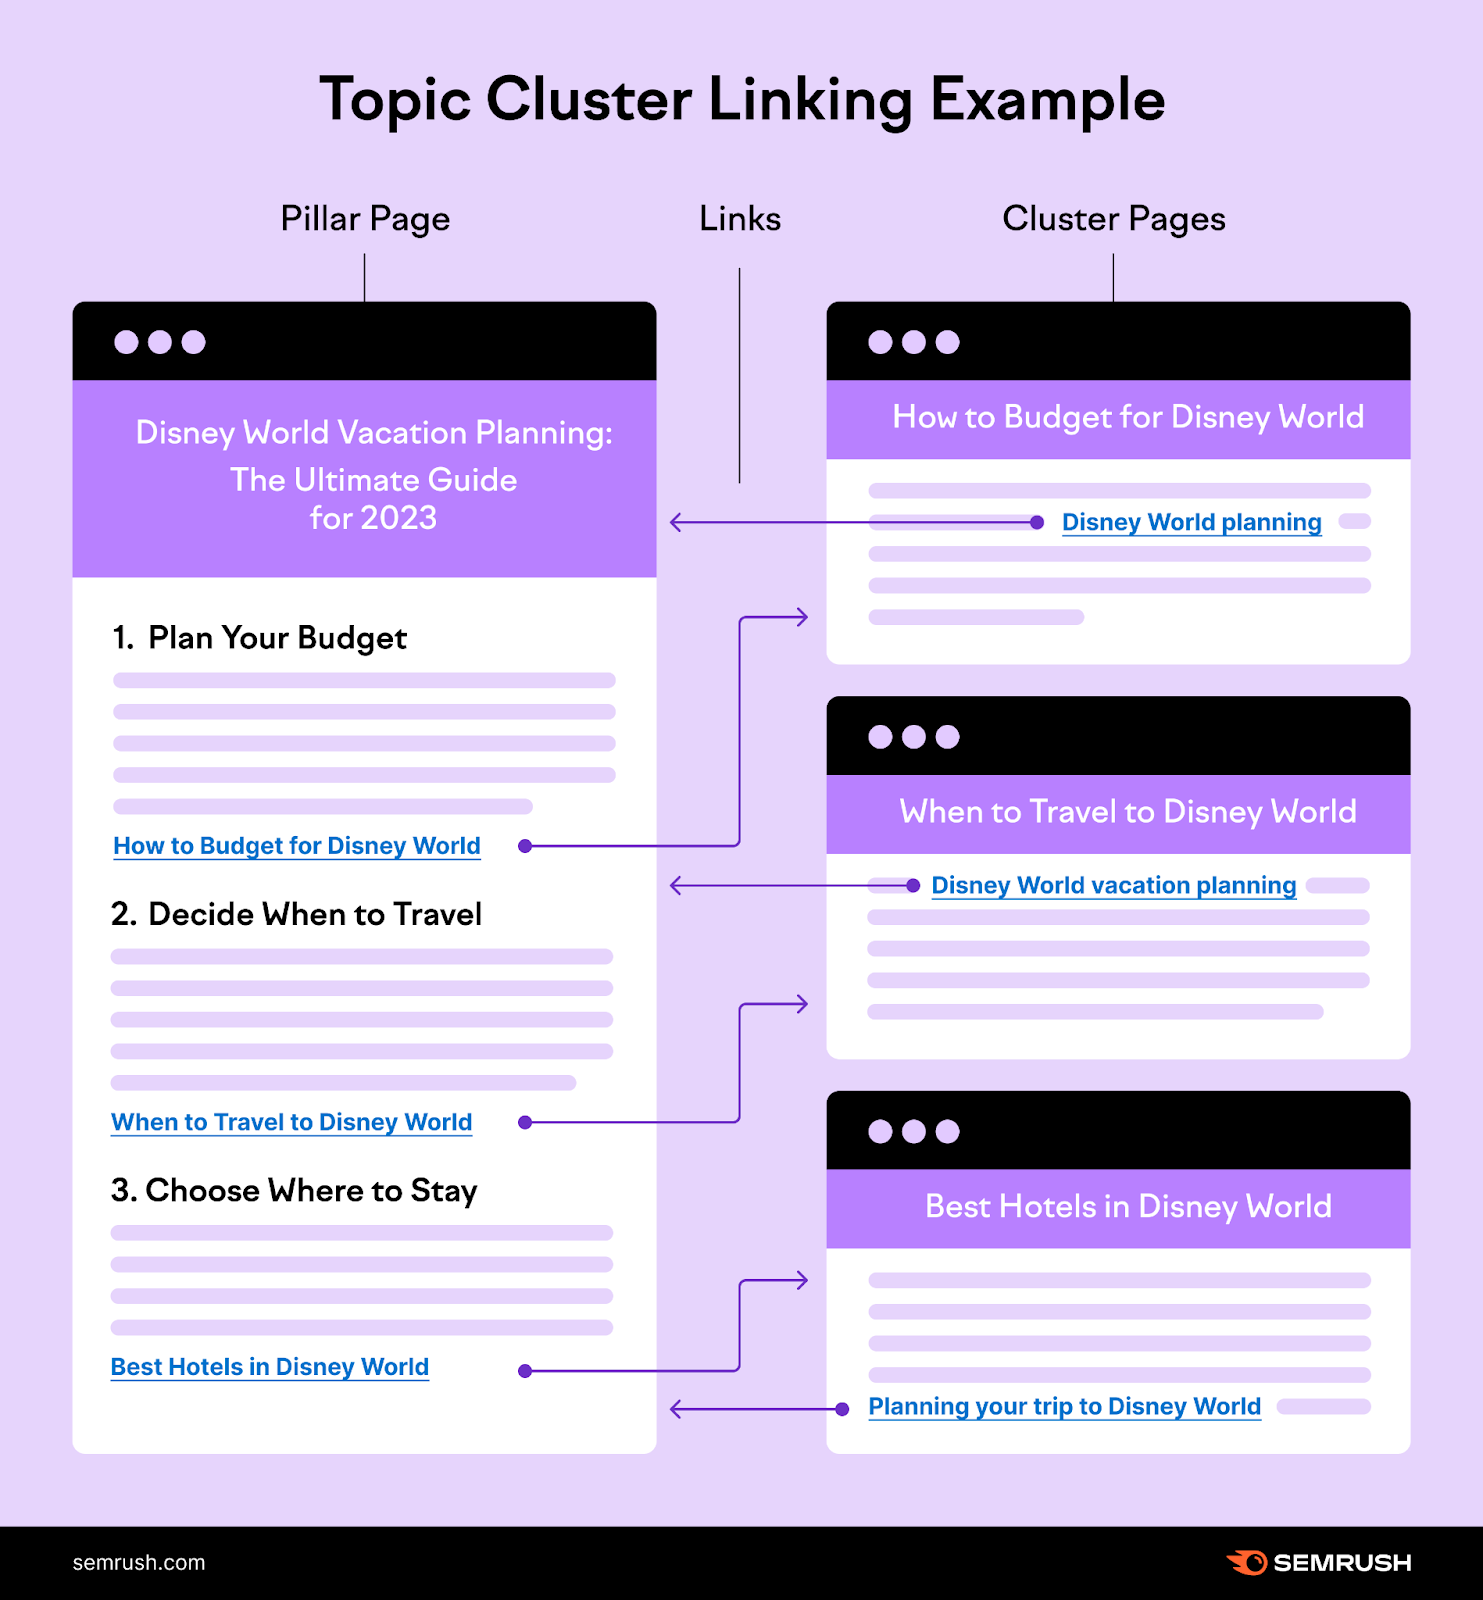 A topic cluster linking structure with 4 columns: a pillar page and 3 cluster pages connected with bidiractional links.